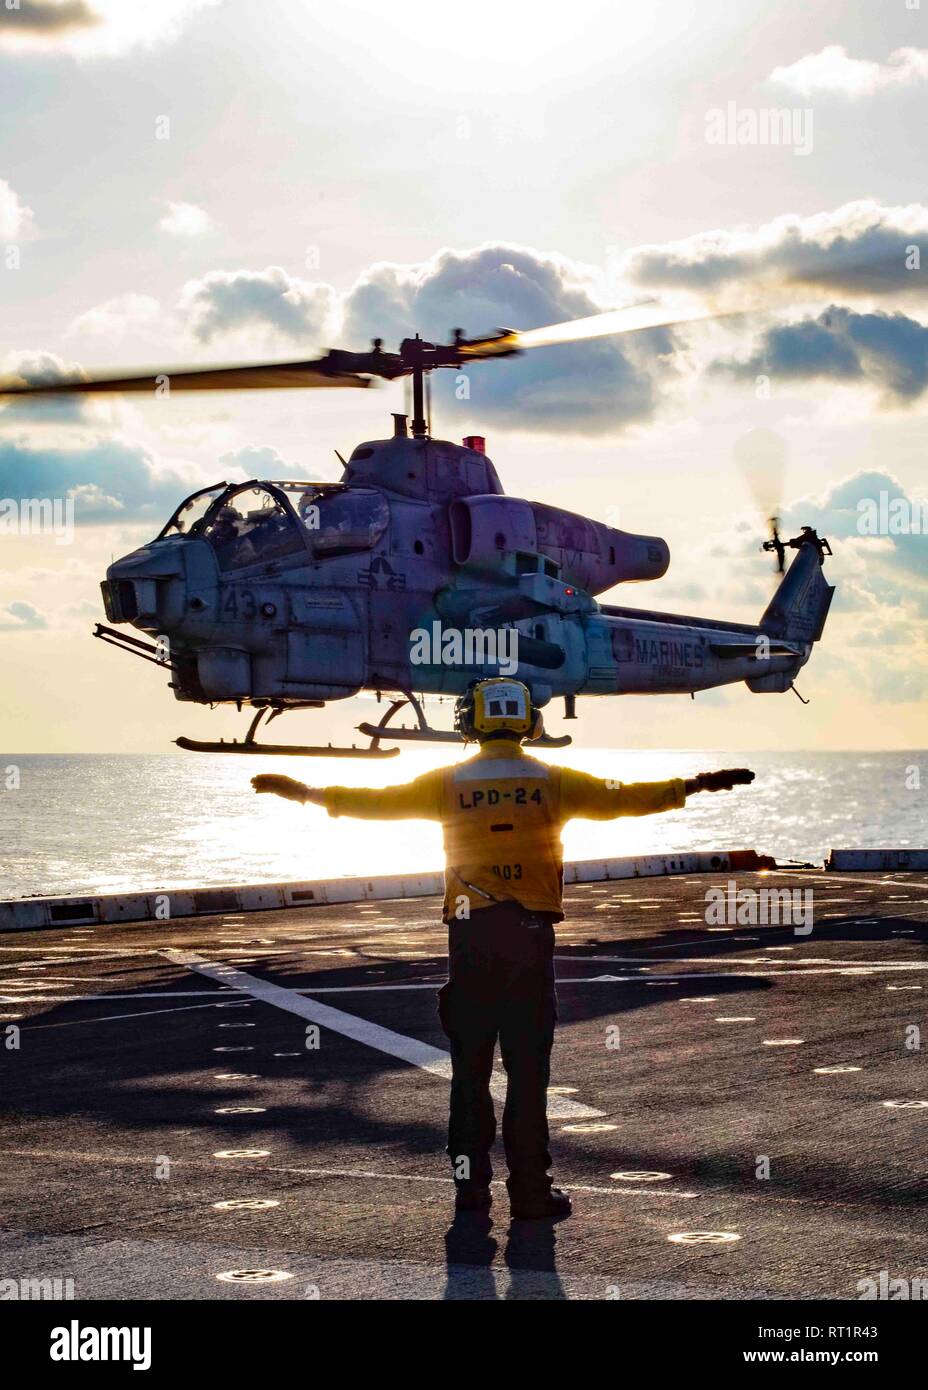 190221-N-HG389-0080 MEDITERRANEAN SEA (Feb. 21, 2019) Aviation Boatswain’s Mate (Handling) 3rd Class Kenneth Smith signals to an AH-1W Super Cobra helicopter assigned to the “Black Knights” of Marine Medium Tiltrotor Squadron (VMM) 264 (Reinforced) as it lands on the flight deck of the San Antonio-class amphibious transport dock ship USS Arlington (LPD 24), Feb. 21, 2019. Arlington is on a scheduled deployment as part of the Kearsarge Amphibious Ready Group in support of maritime security operations, crisis response and theater security cooperation, while also providing a forward naval presenc Stock Photo